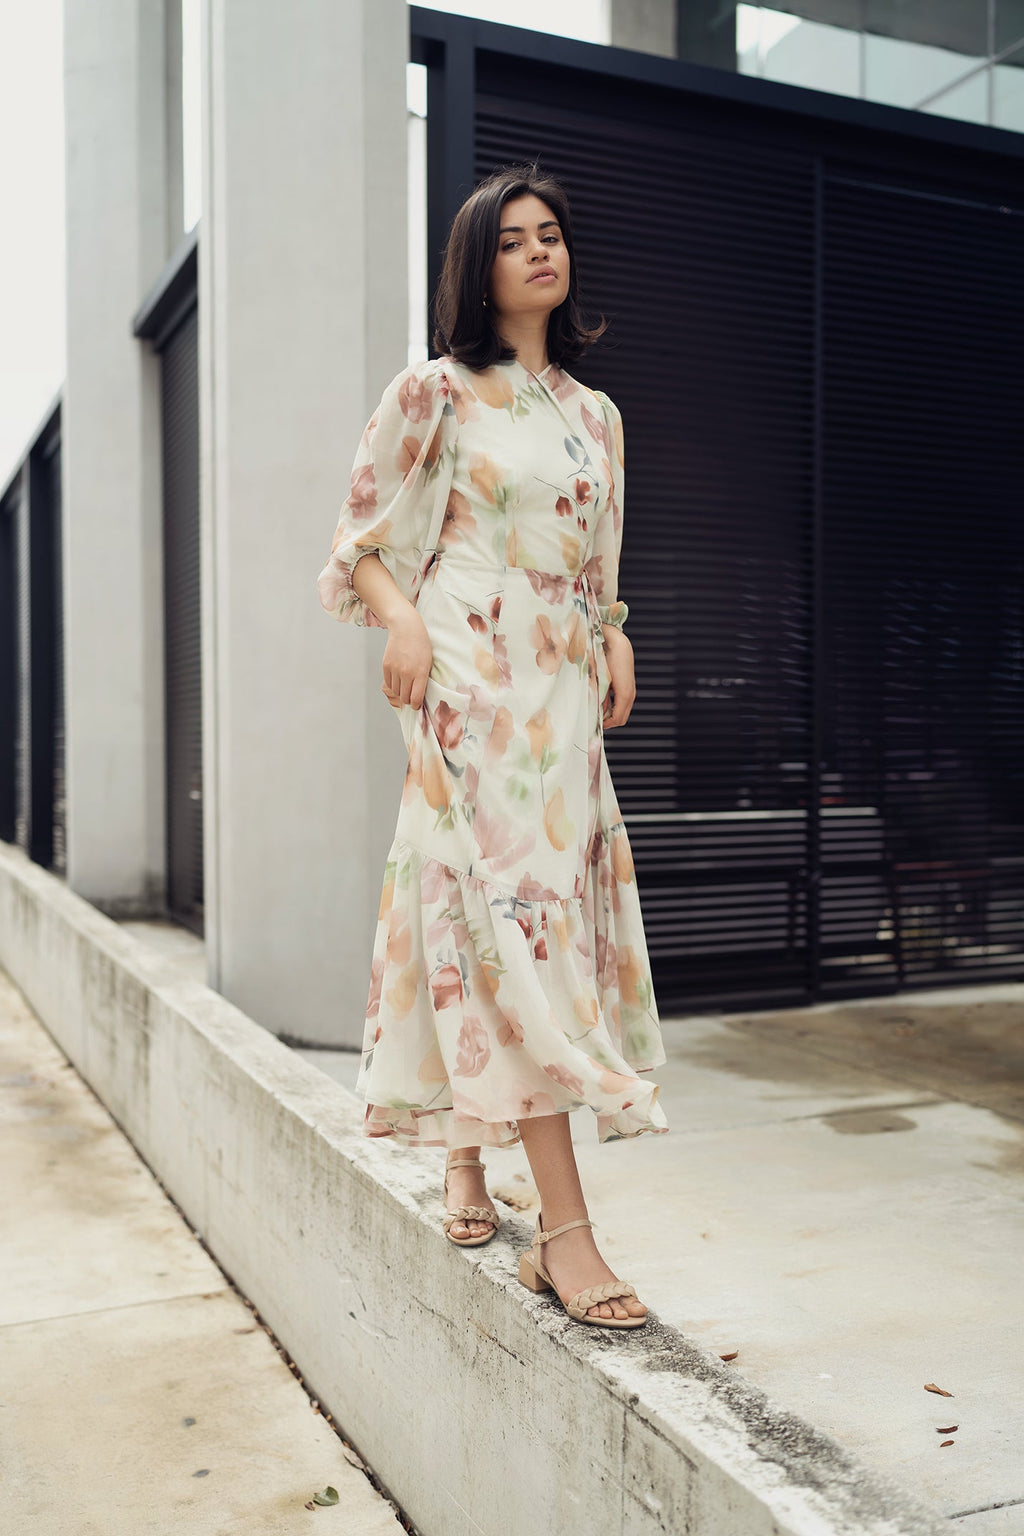 WRAP DRESS IN CREAM/PINK FLORAL